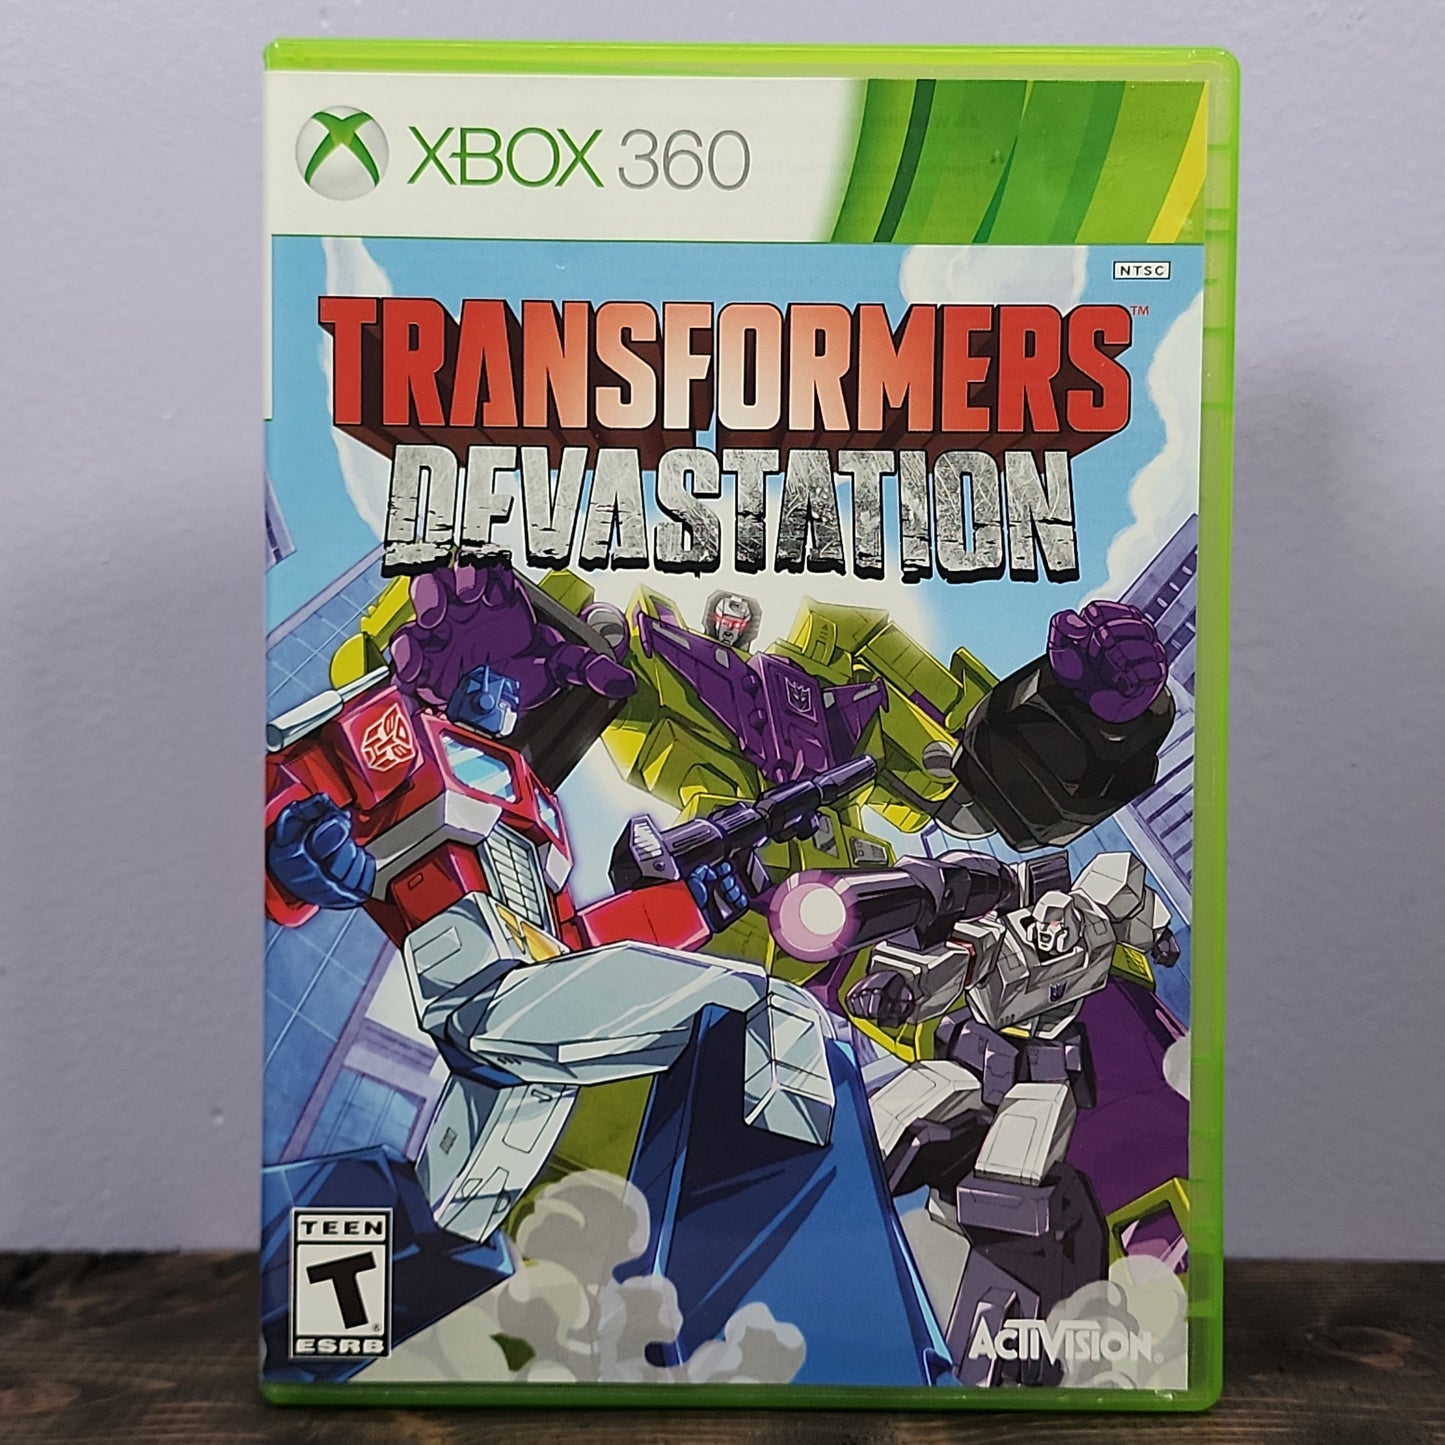 Xbox 360 - Transformers: Devastation Retrograde Collectibles Action, Activision, Adventure, Beat 'Em Up, CIB, PlatinumGames, Sci-Fi, T Rated, Transformers Series Preowned Video Game 